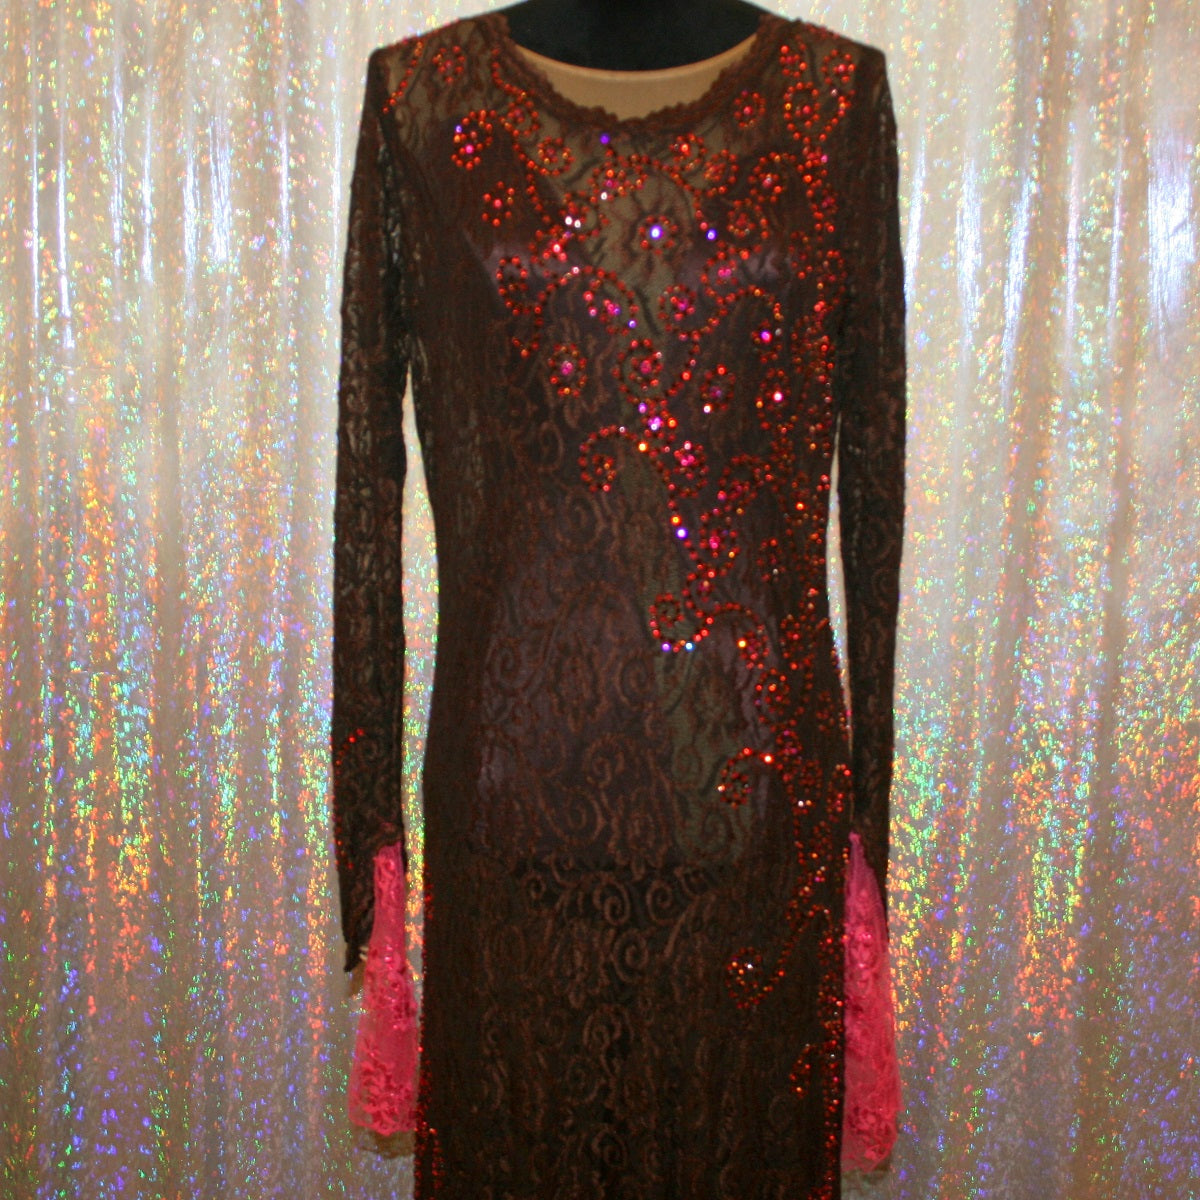 close up top view of Brown lace tango dress, paso dress, fabulous bolero dress or rumba dress created in luxurious chocolate brown stretch lace with accent flounces of a deep pink glitter lace, embellished with Swarovski rhinestone detail work in Indian pink, mocha,  & fuchsia.